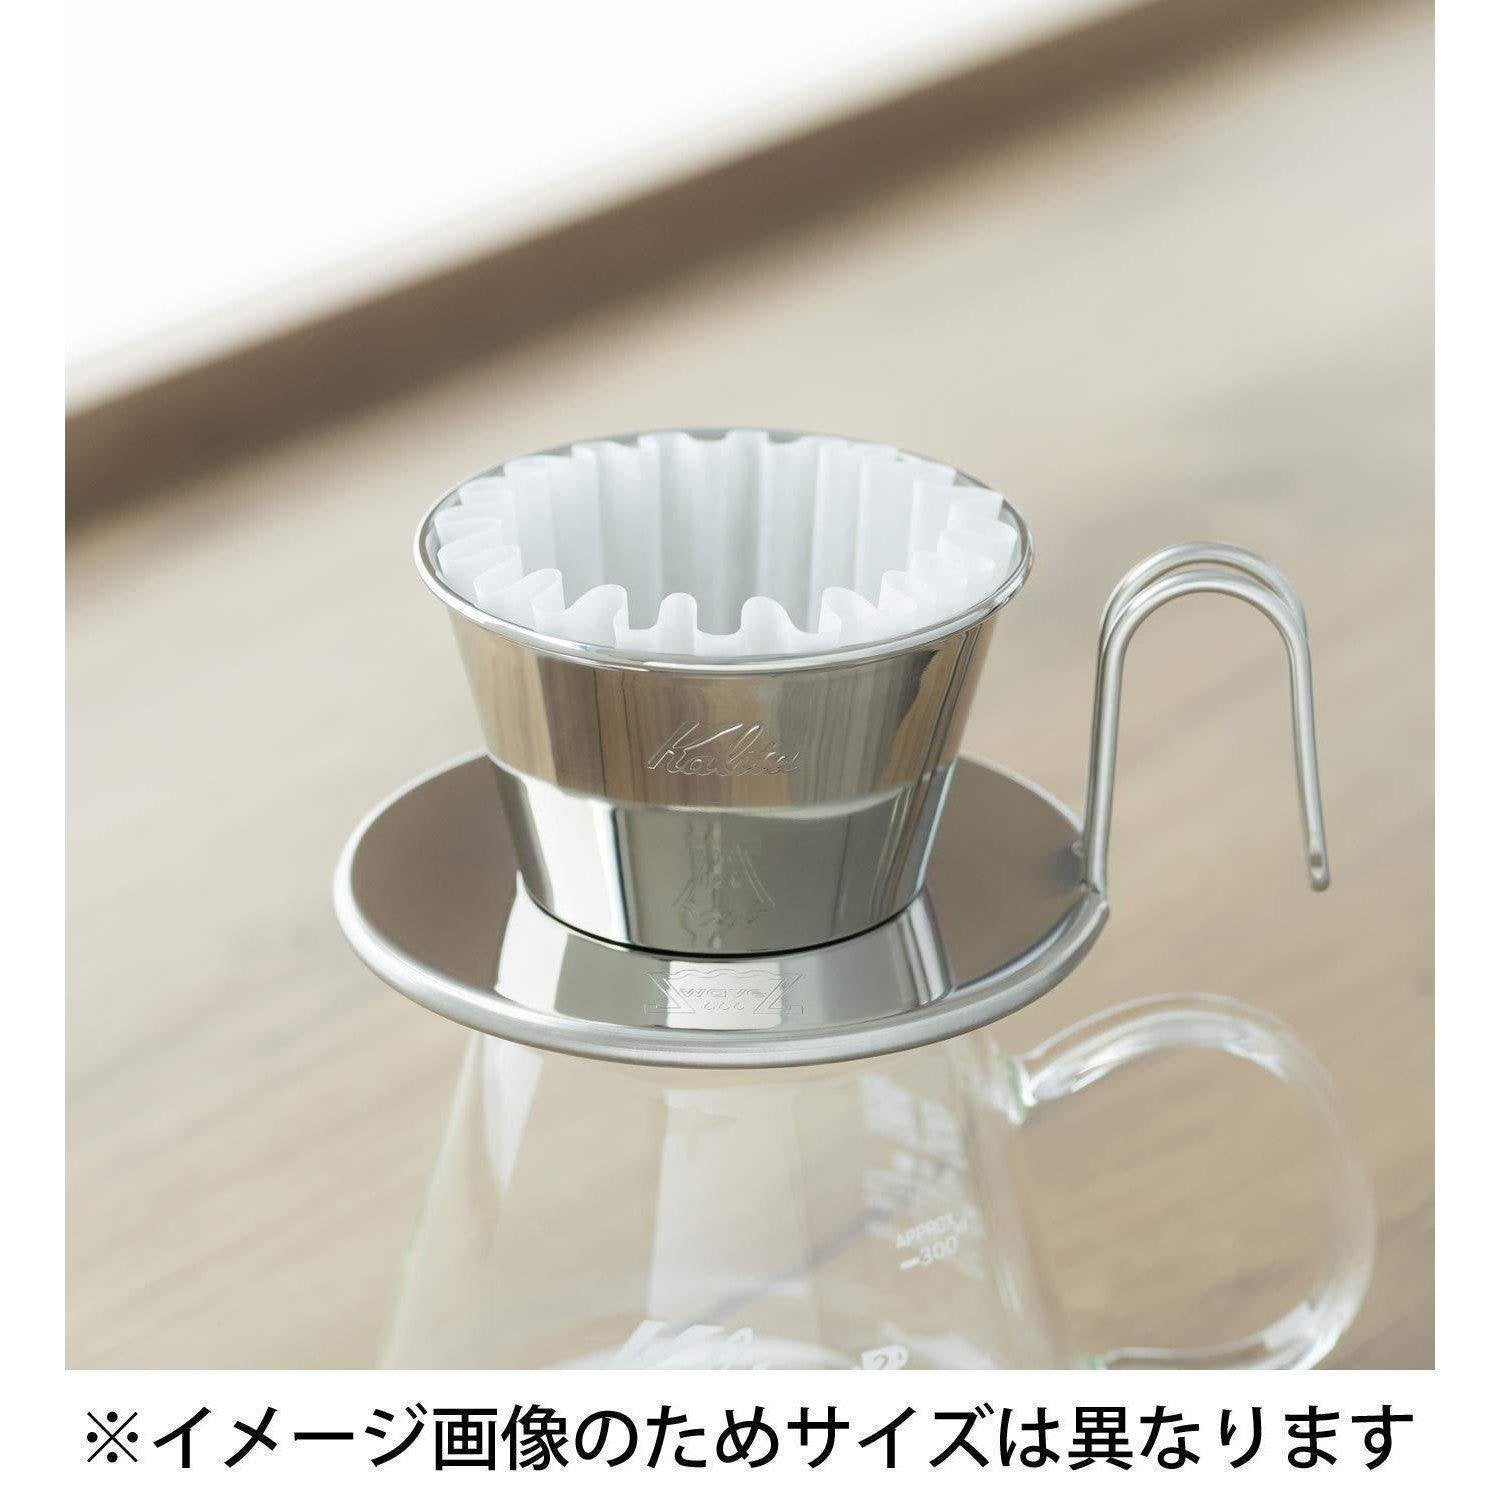 Kalita Stainless Wave Coffee Dripper + Glass Server + Paper Filters Set